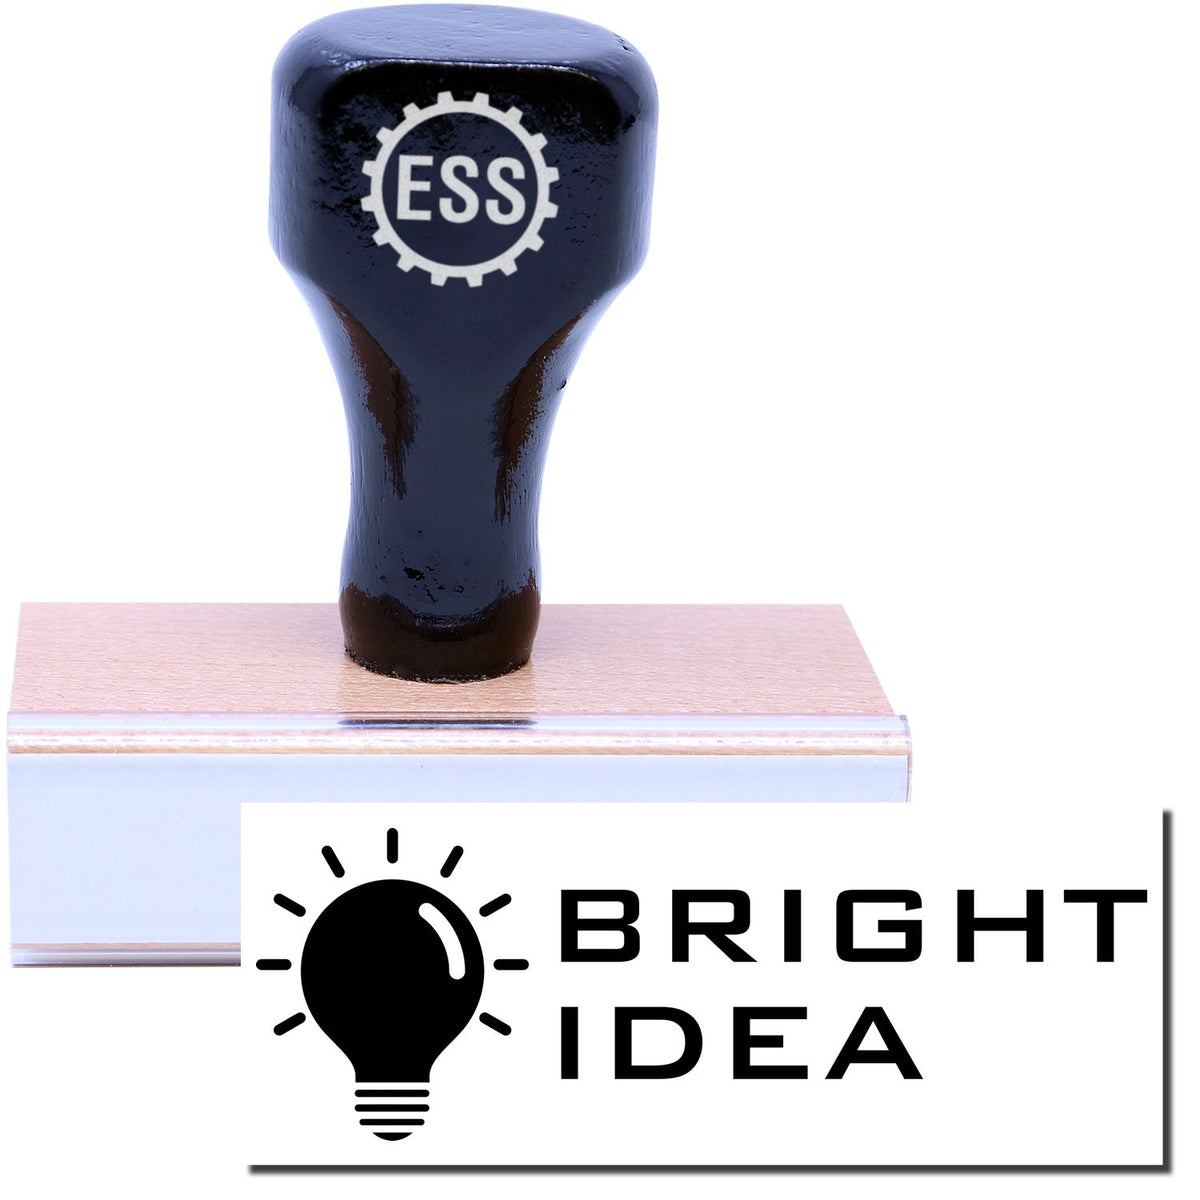 A stock office rubber stamp with a stamped image showing how the text &quot;BRIGHT IDEA&quot; in a large tech-style font with an image of a bright lightbulb is displayed after stamping.